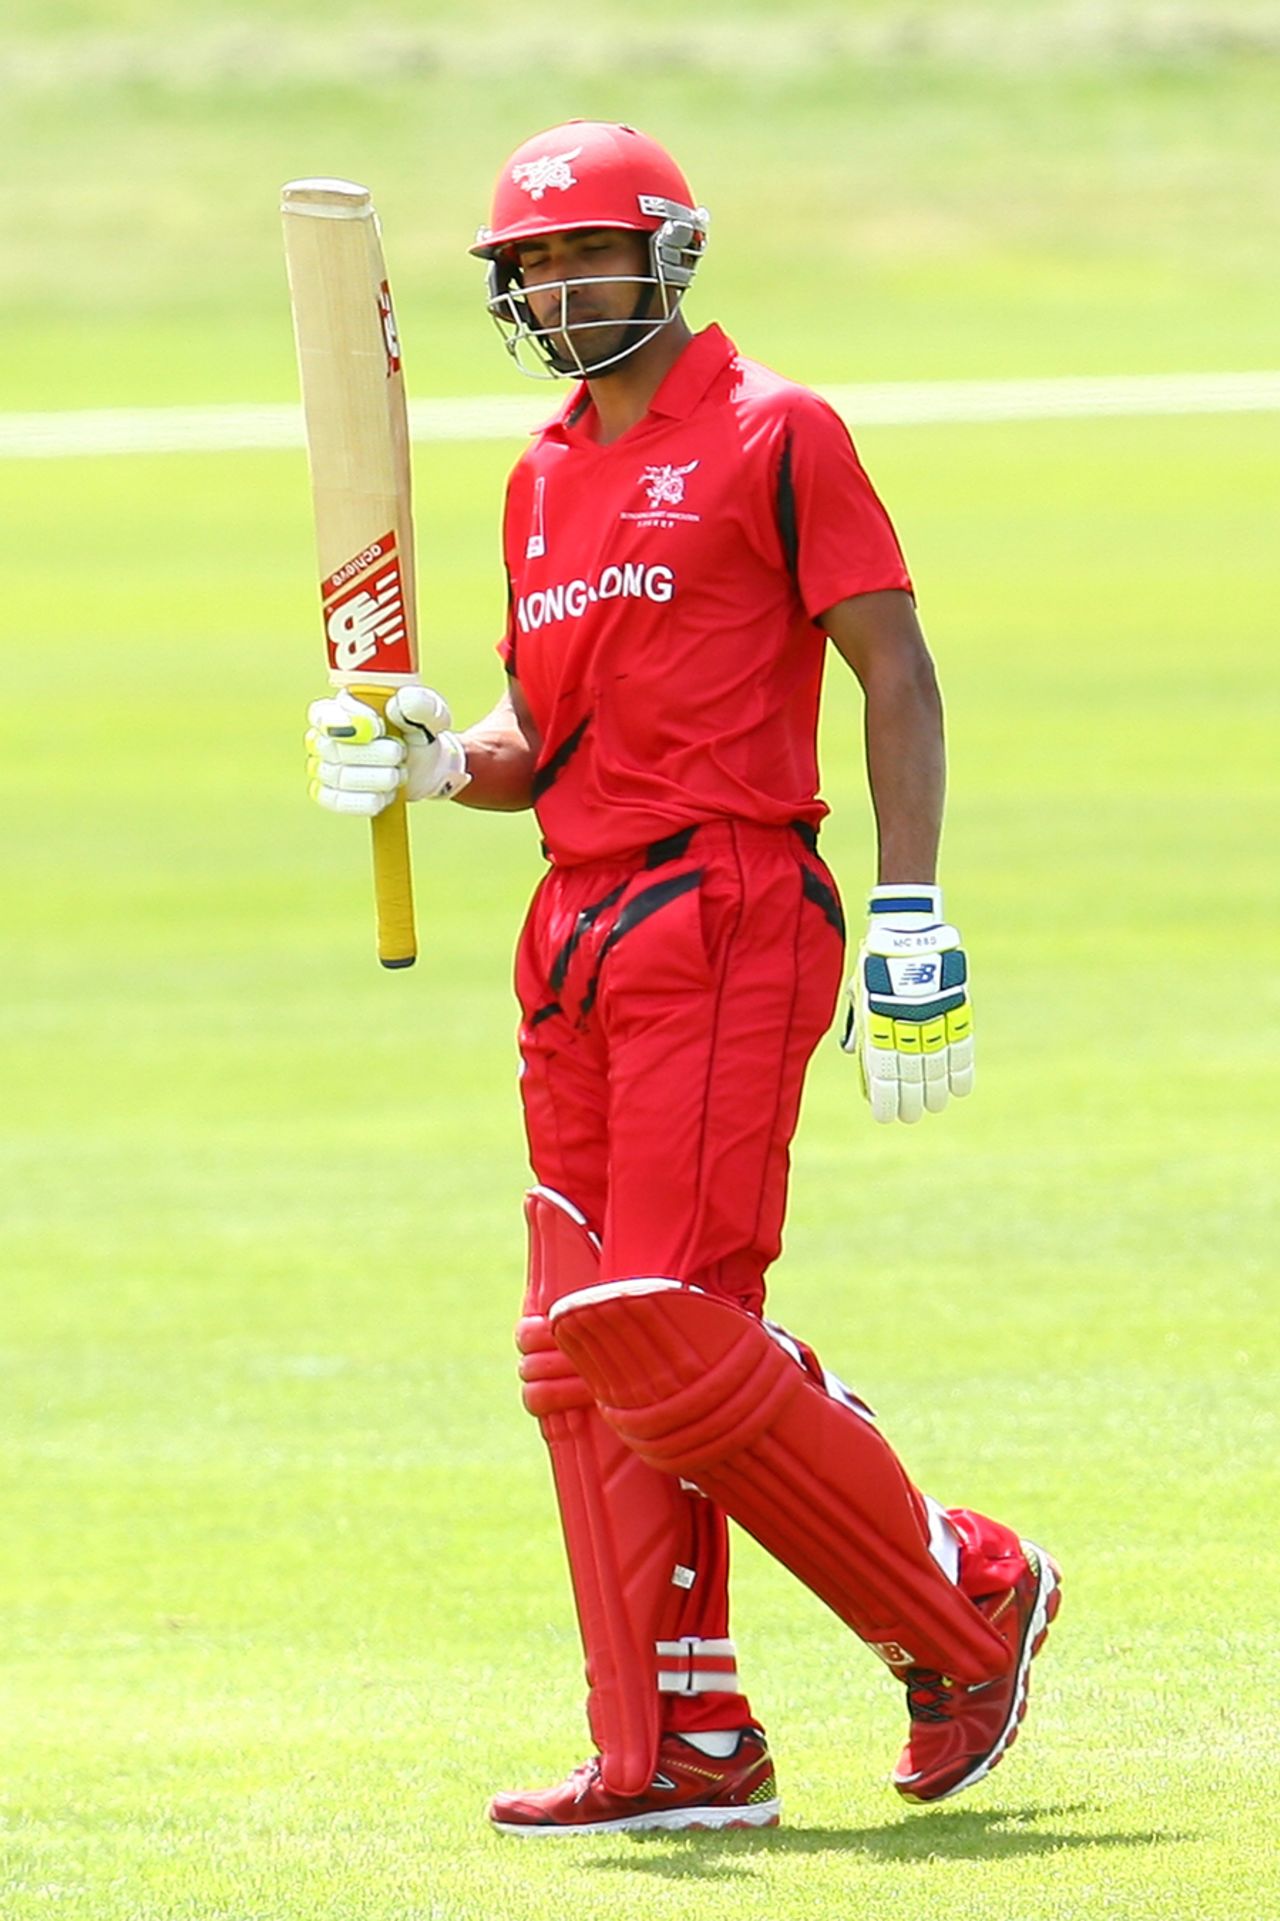 Irfan Ahmed top scored with 75 for Hong Kong against Scotland at the ICC Cricket World Cup Qualifier 2014 in New Zealand 